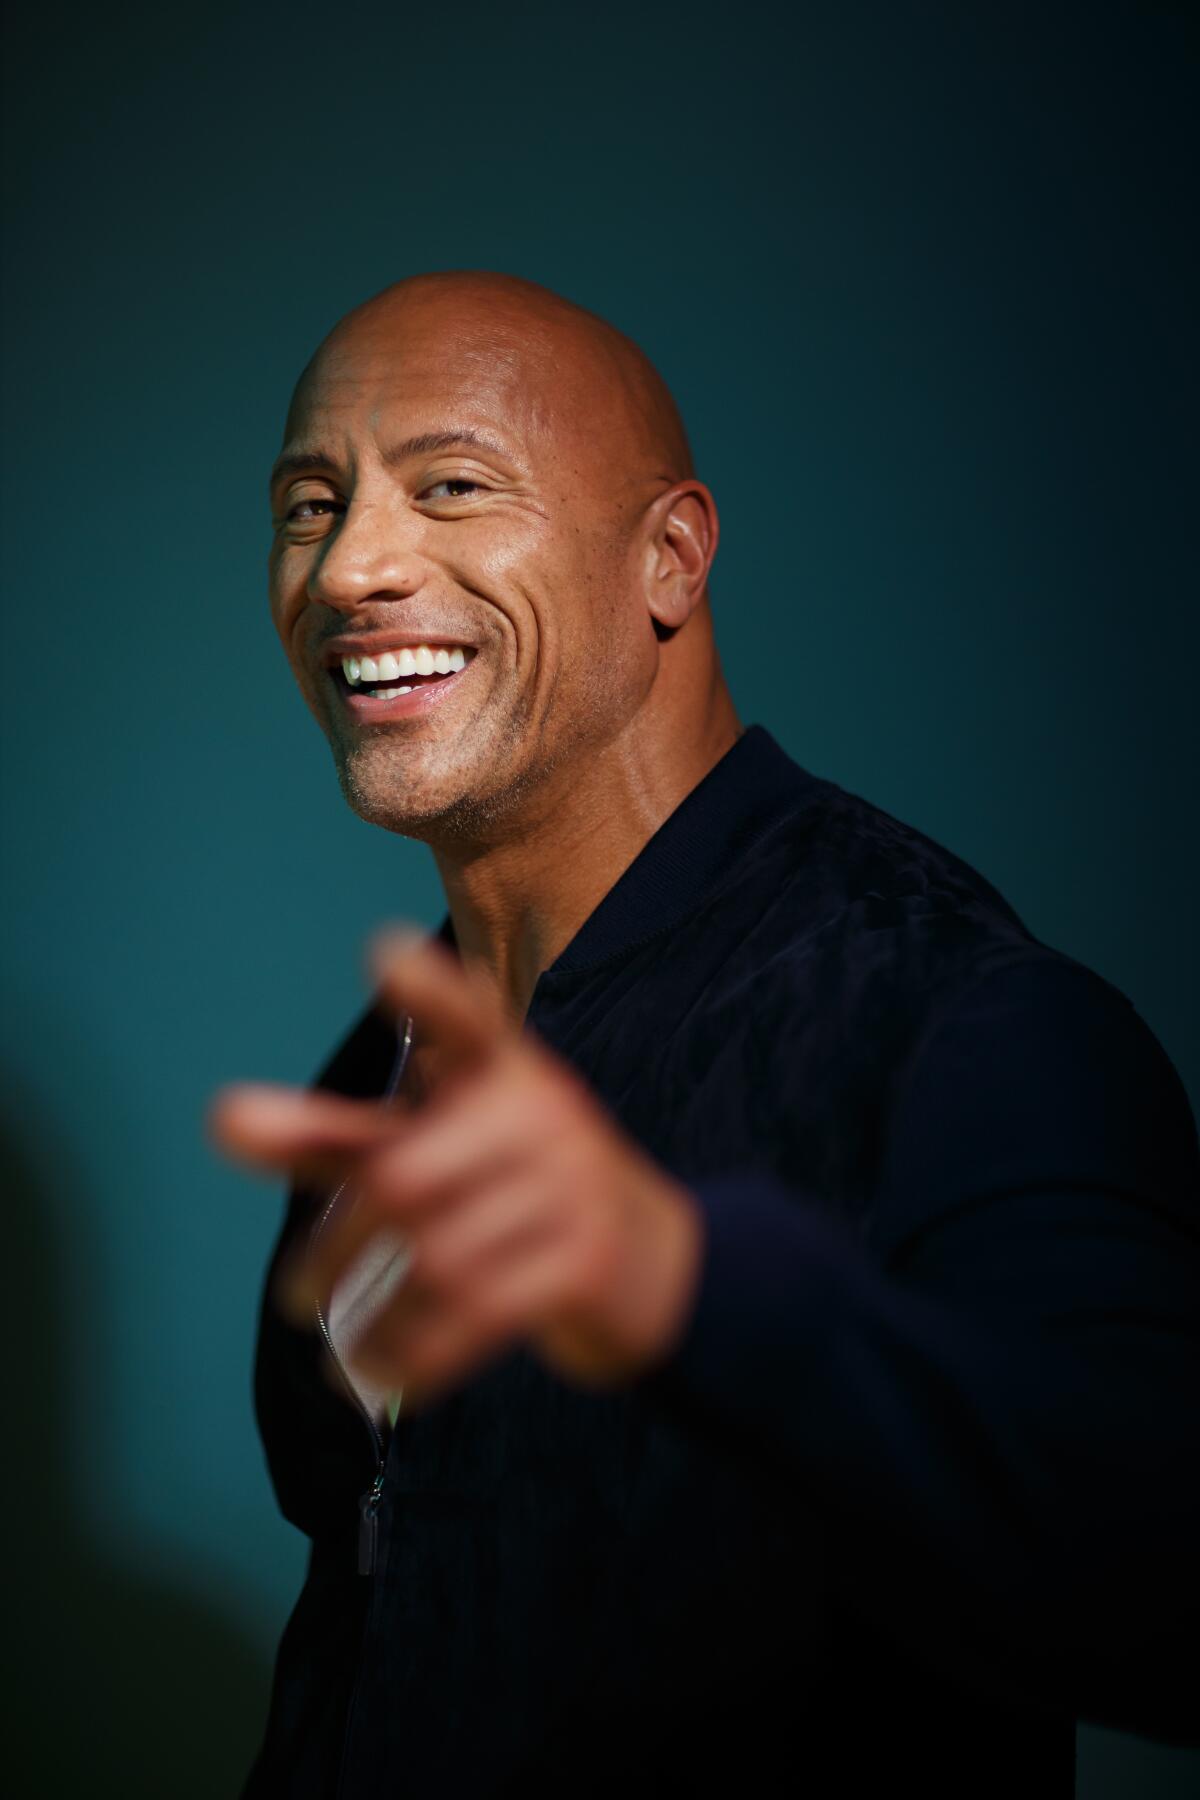 Dwayne Johnson smiles and points with one hand while wearing a black long sleeve shirt